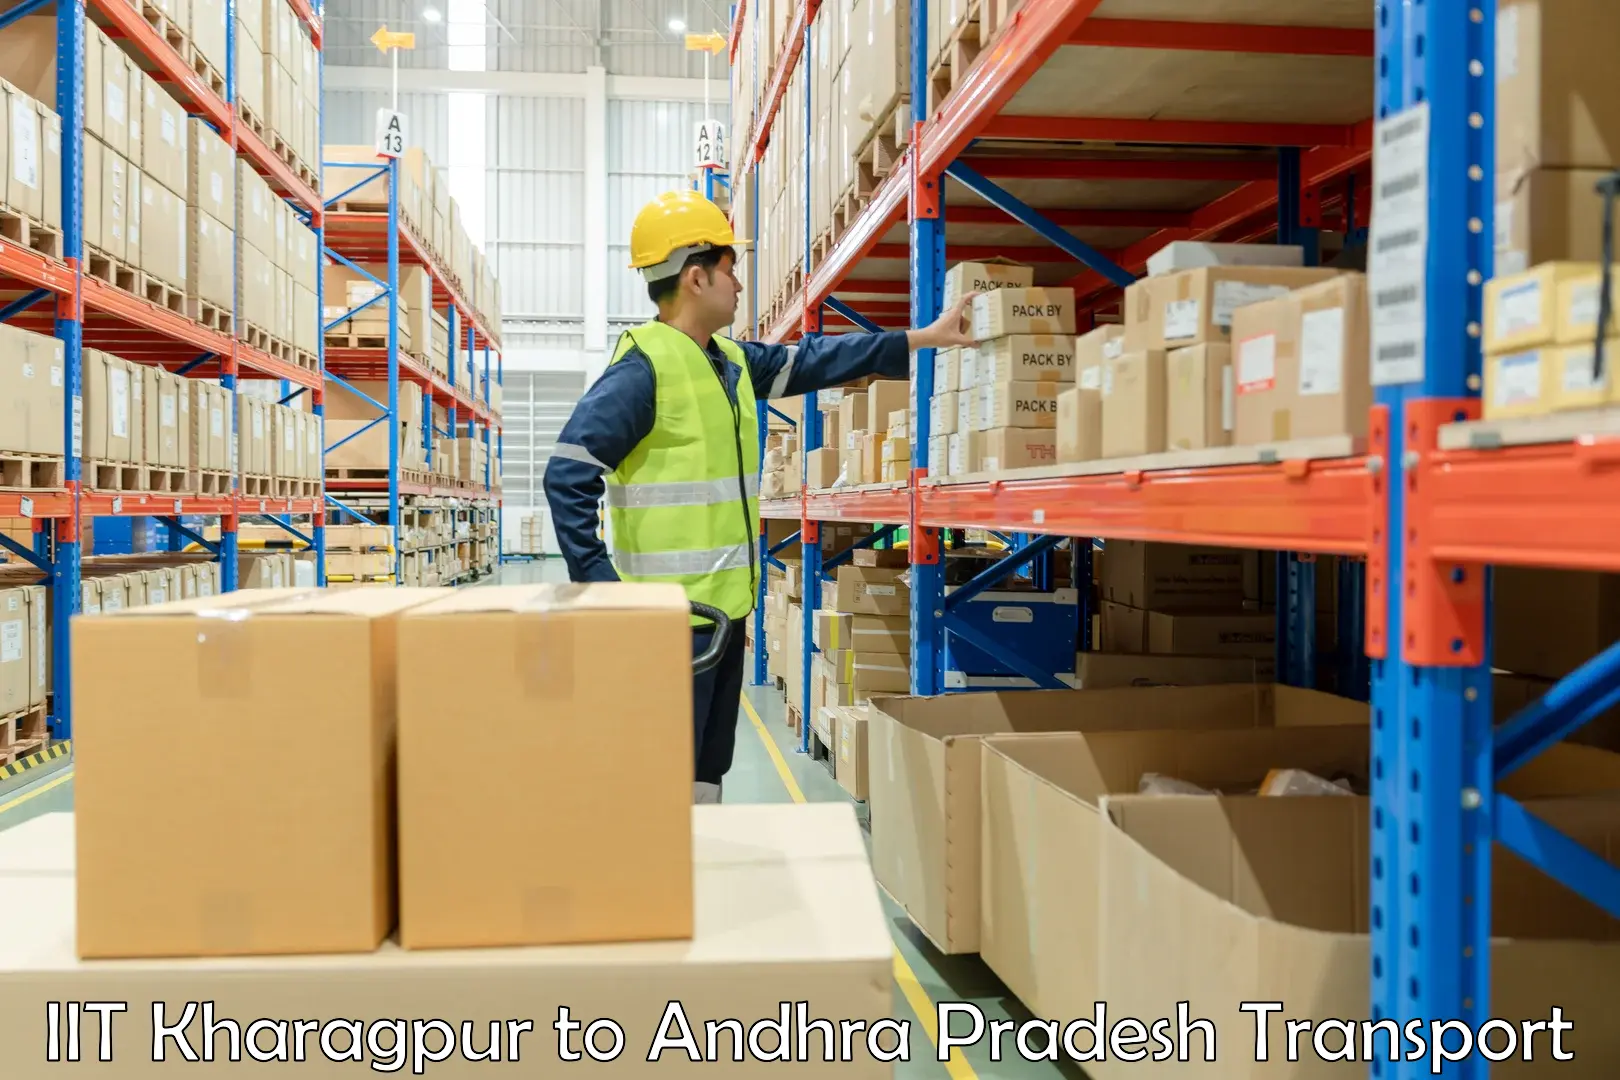 Air freight transport services in IIT Kharagpur to Narsipatnam